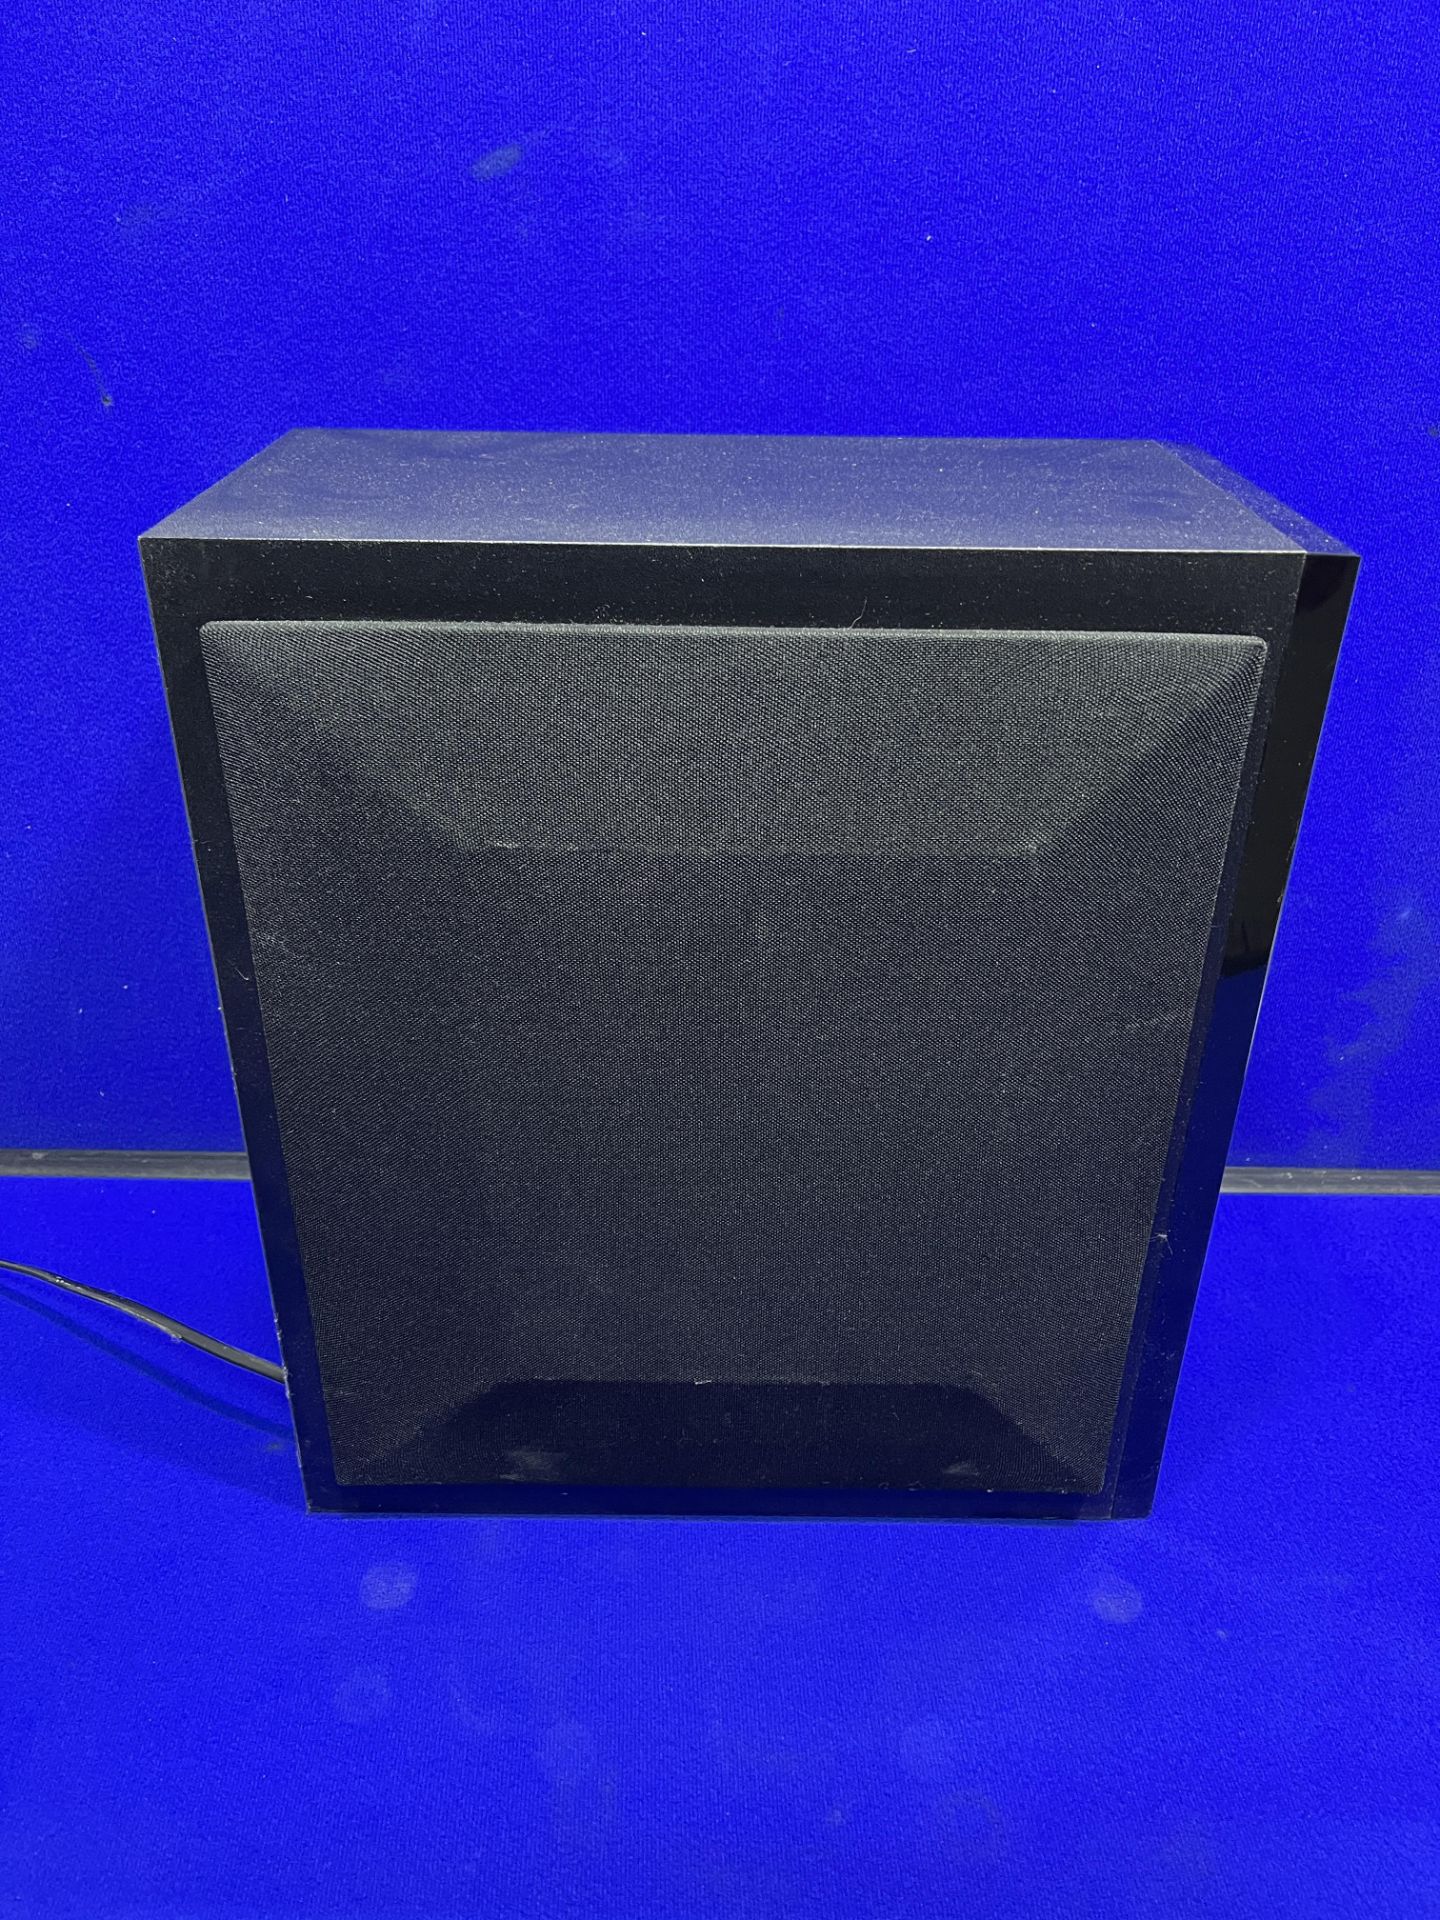 LG S33A1-D Bluetooth Wireless Active Subwoofer - Image 2 of 4